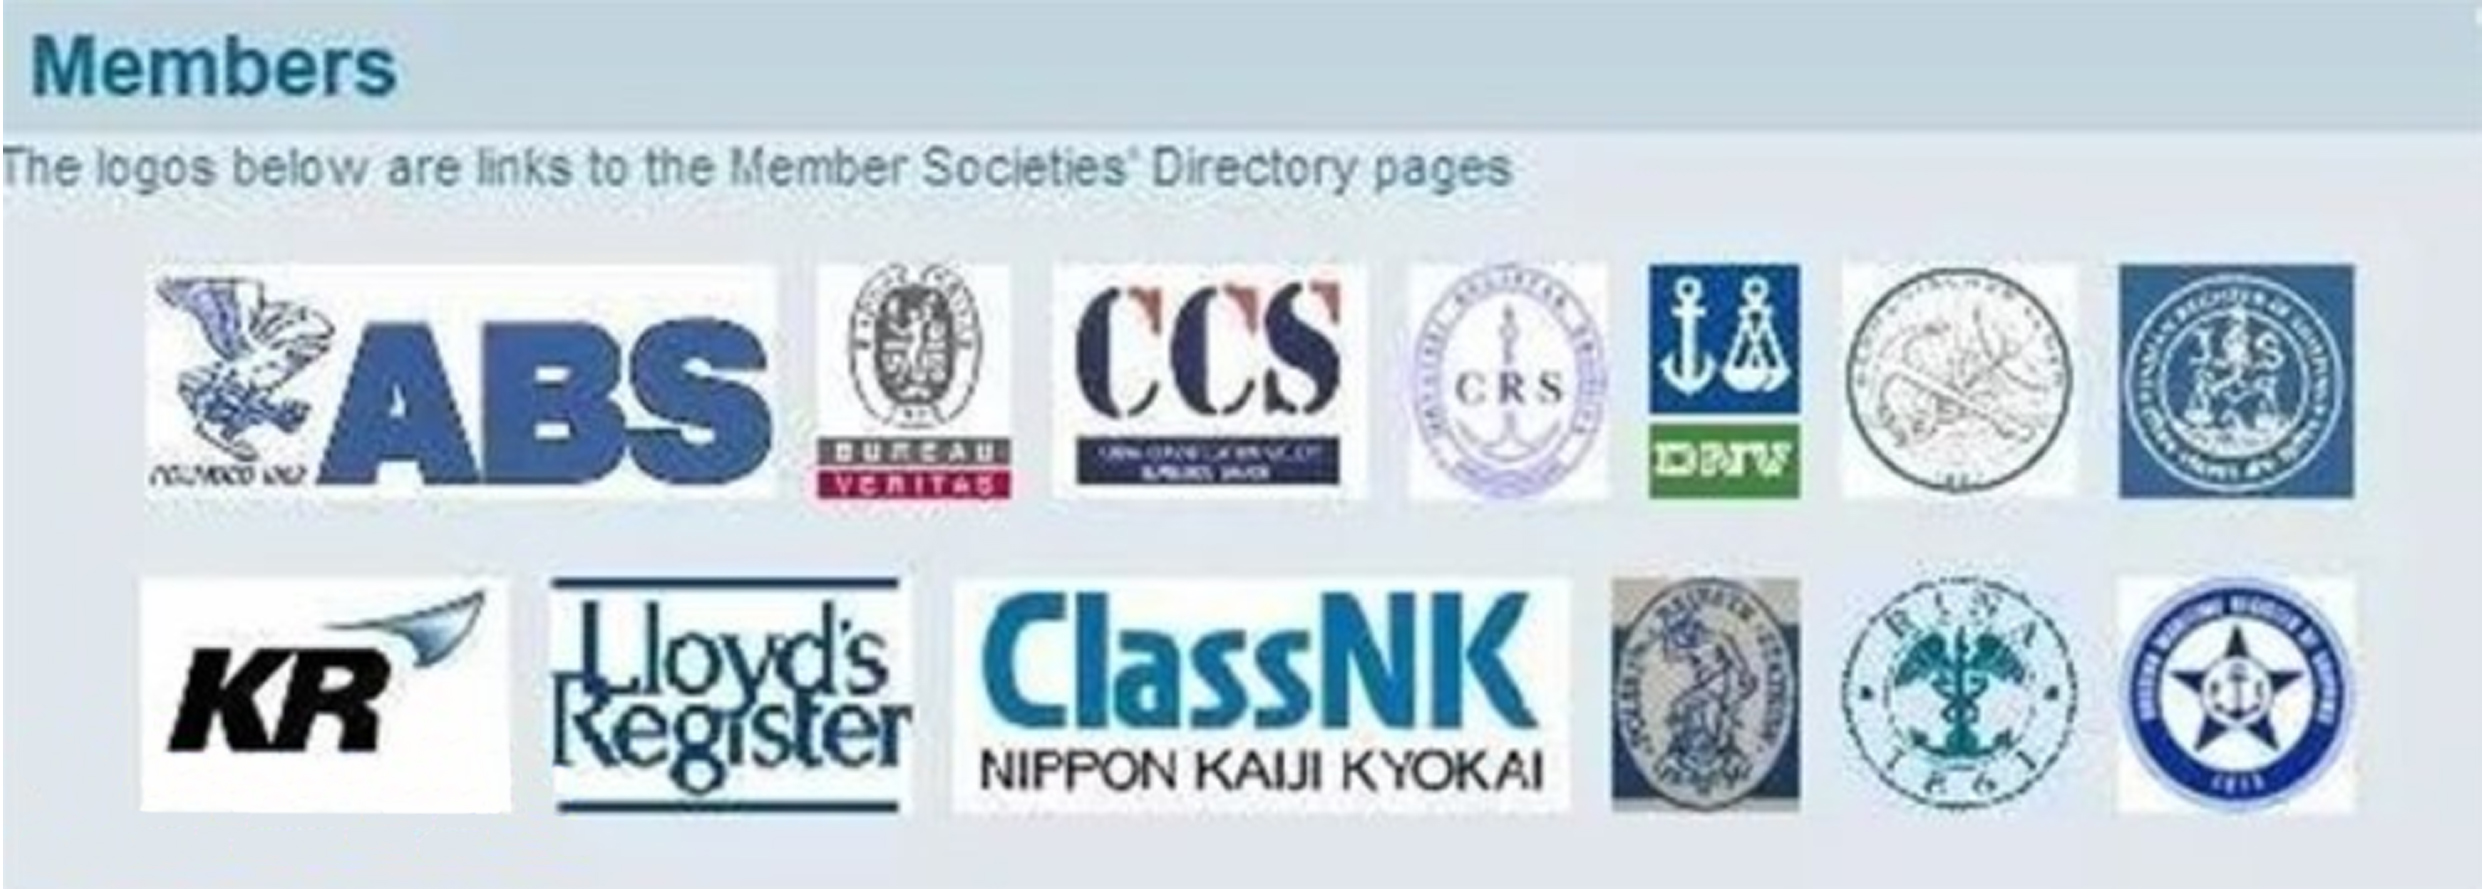 Introduction to the world’s top ten classification societies